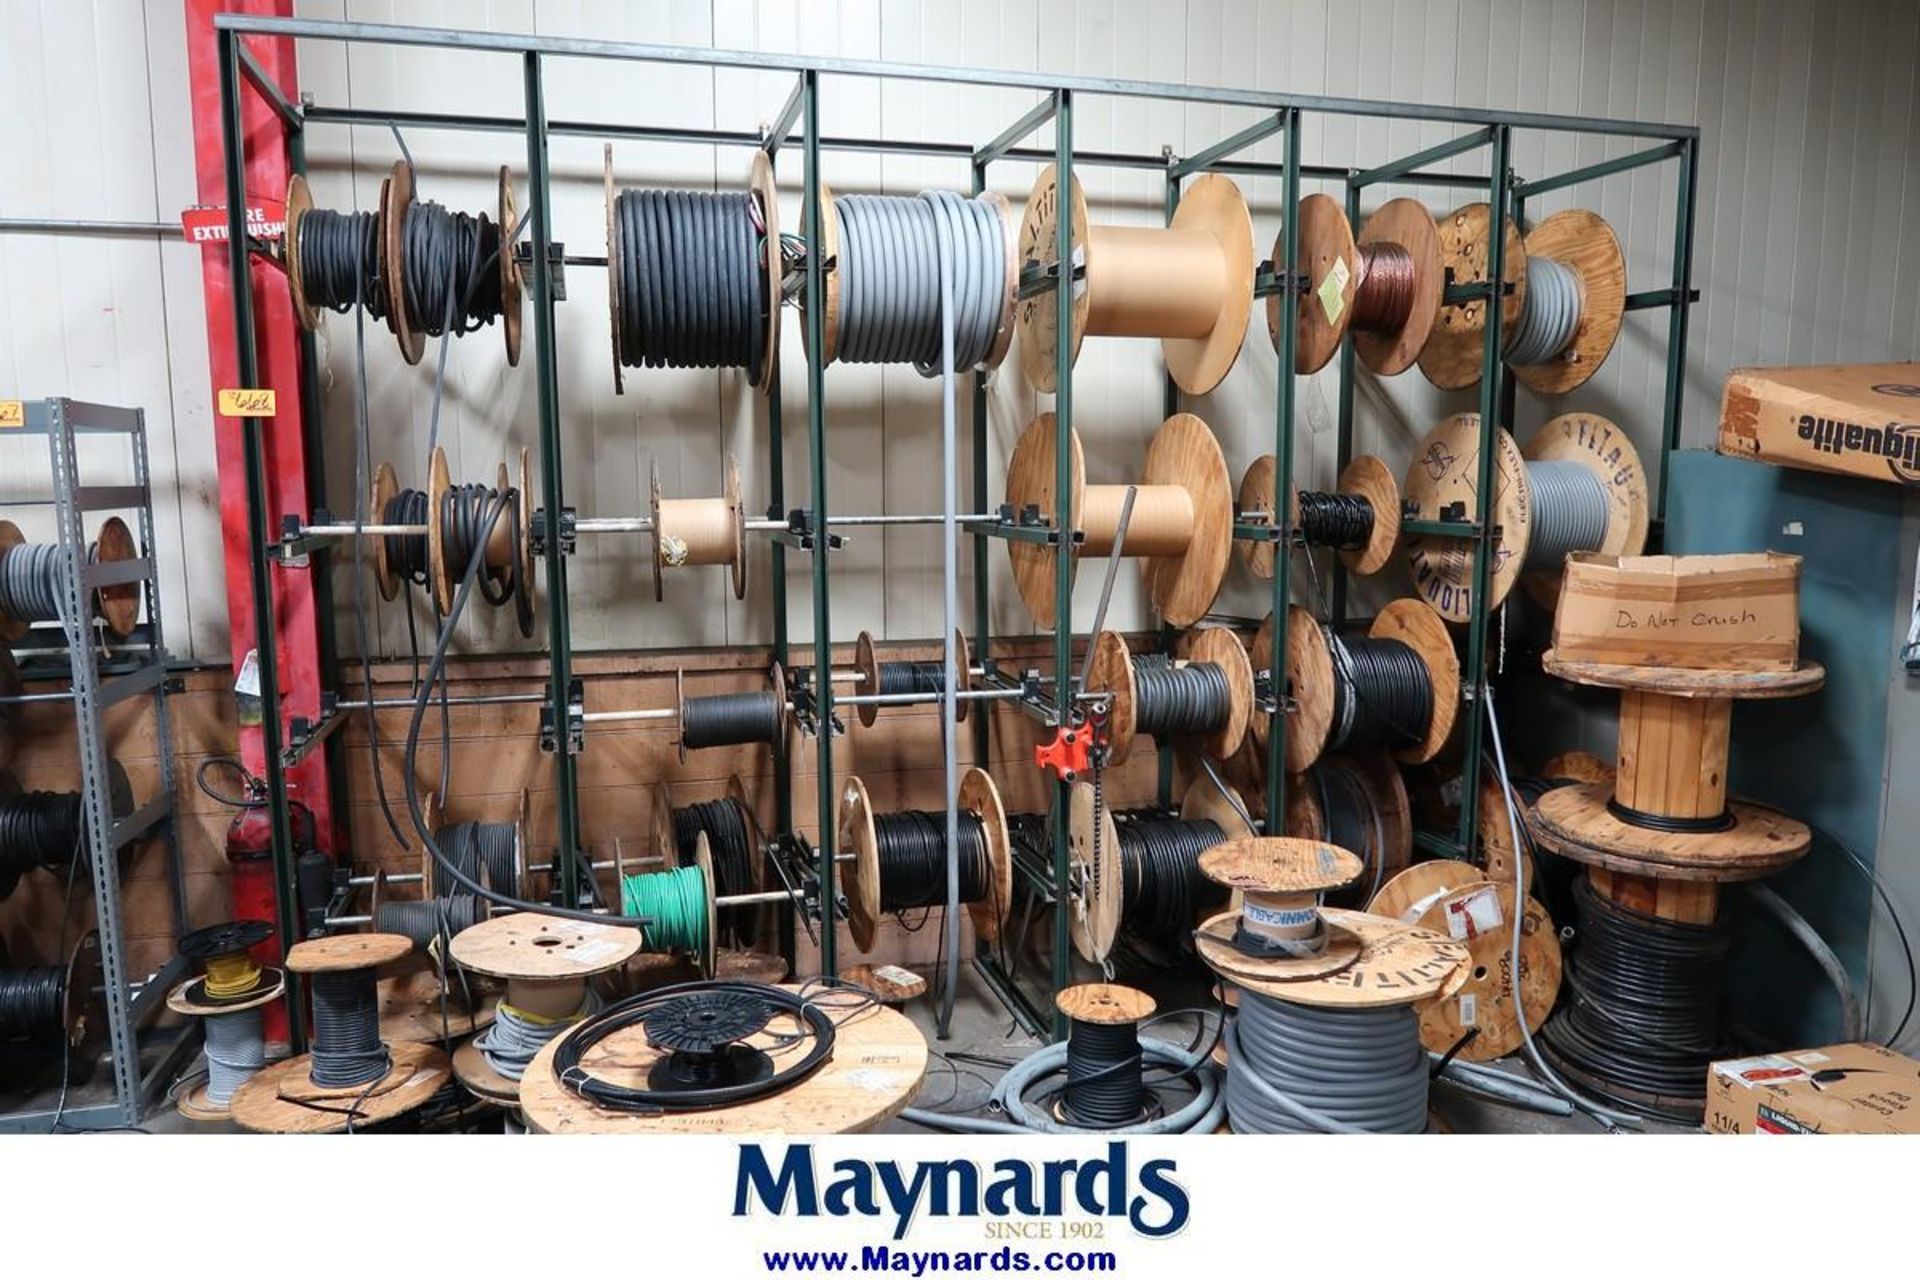 Sections of Steel Wire Rack with Contents of Wire Spools